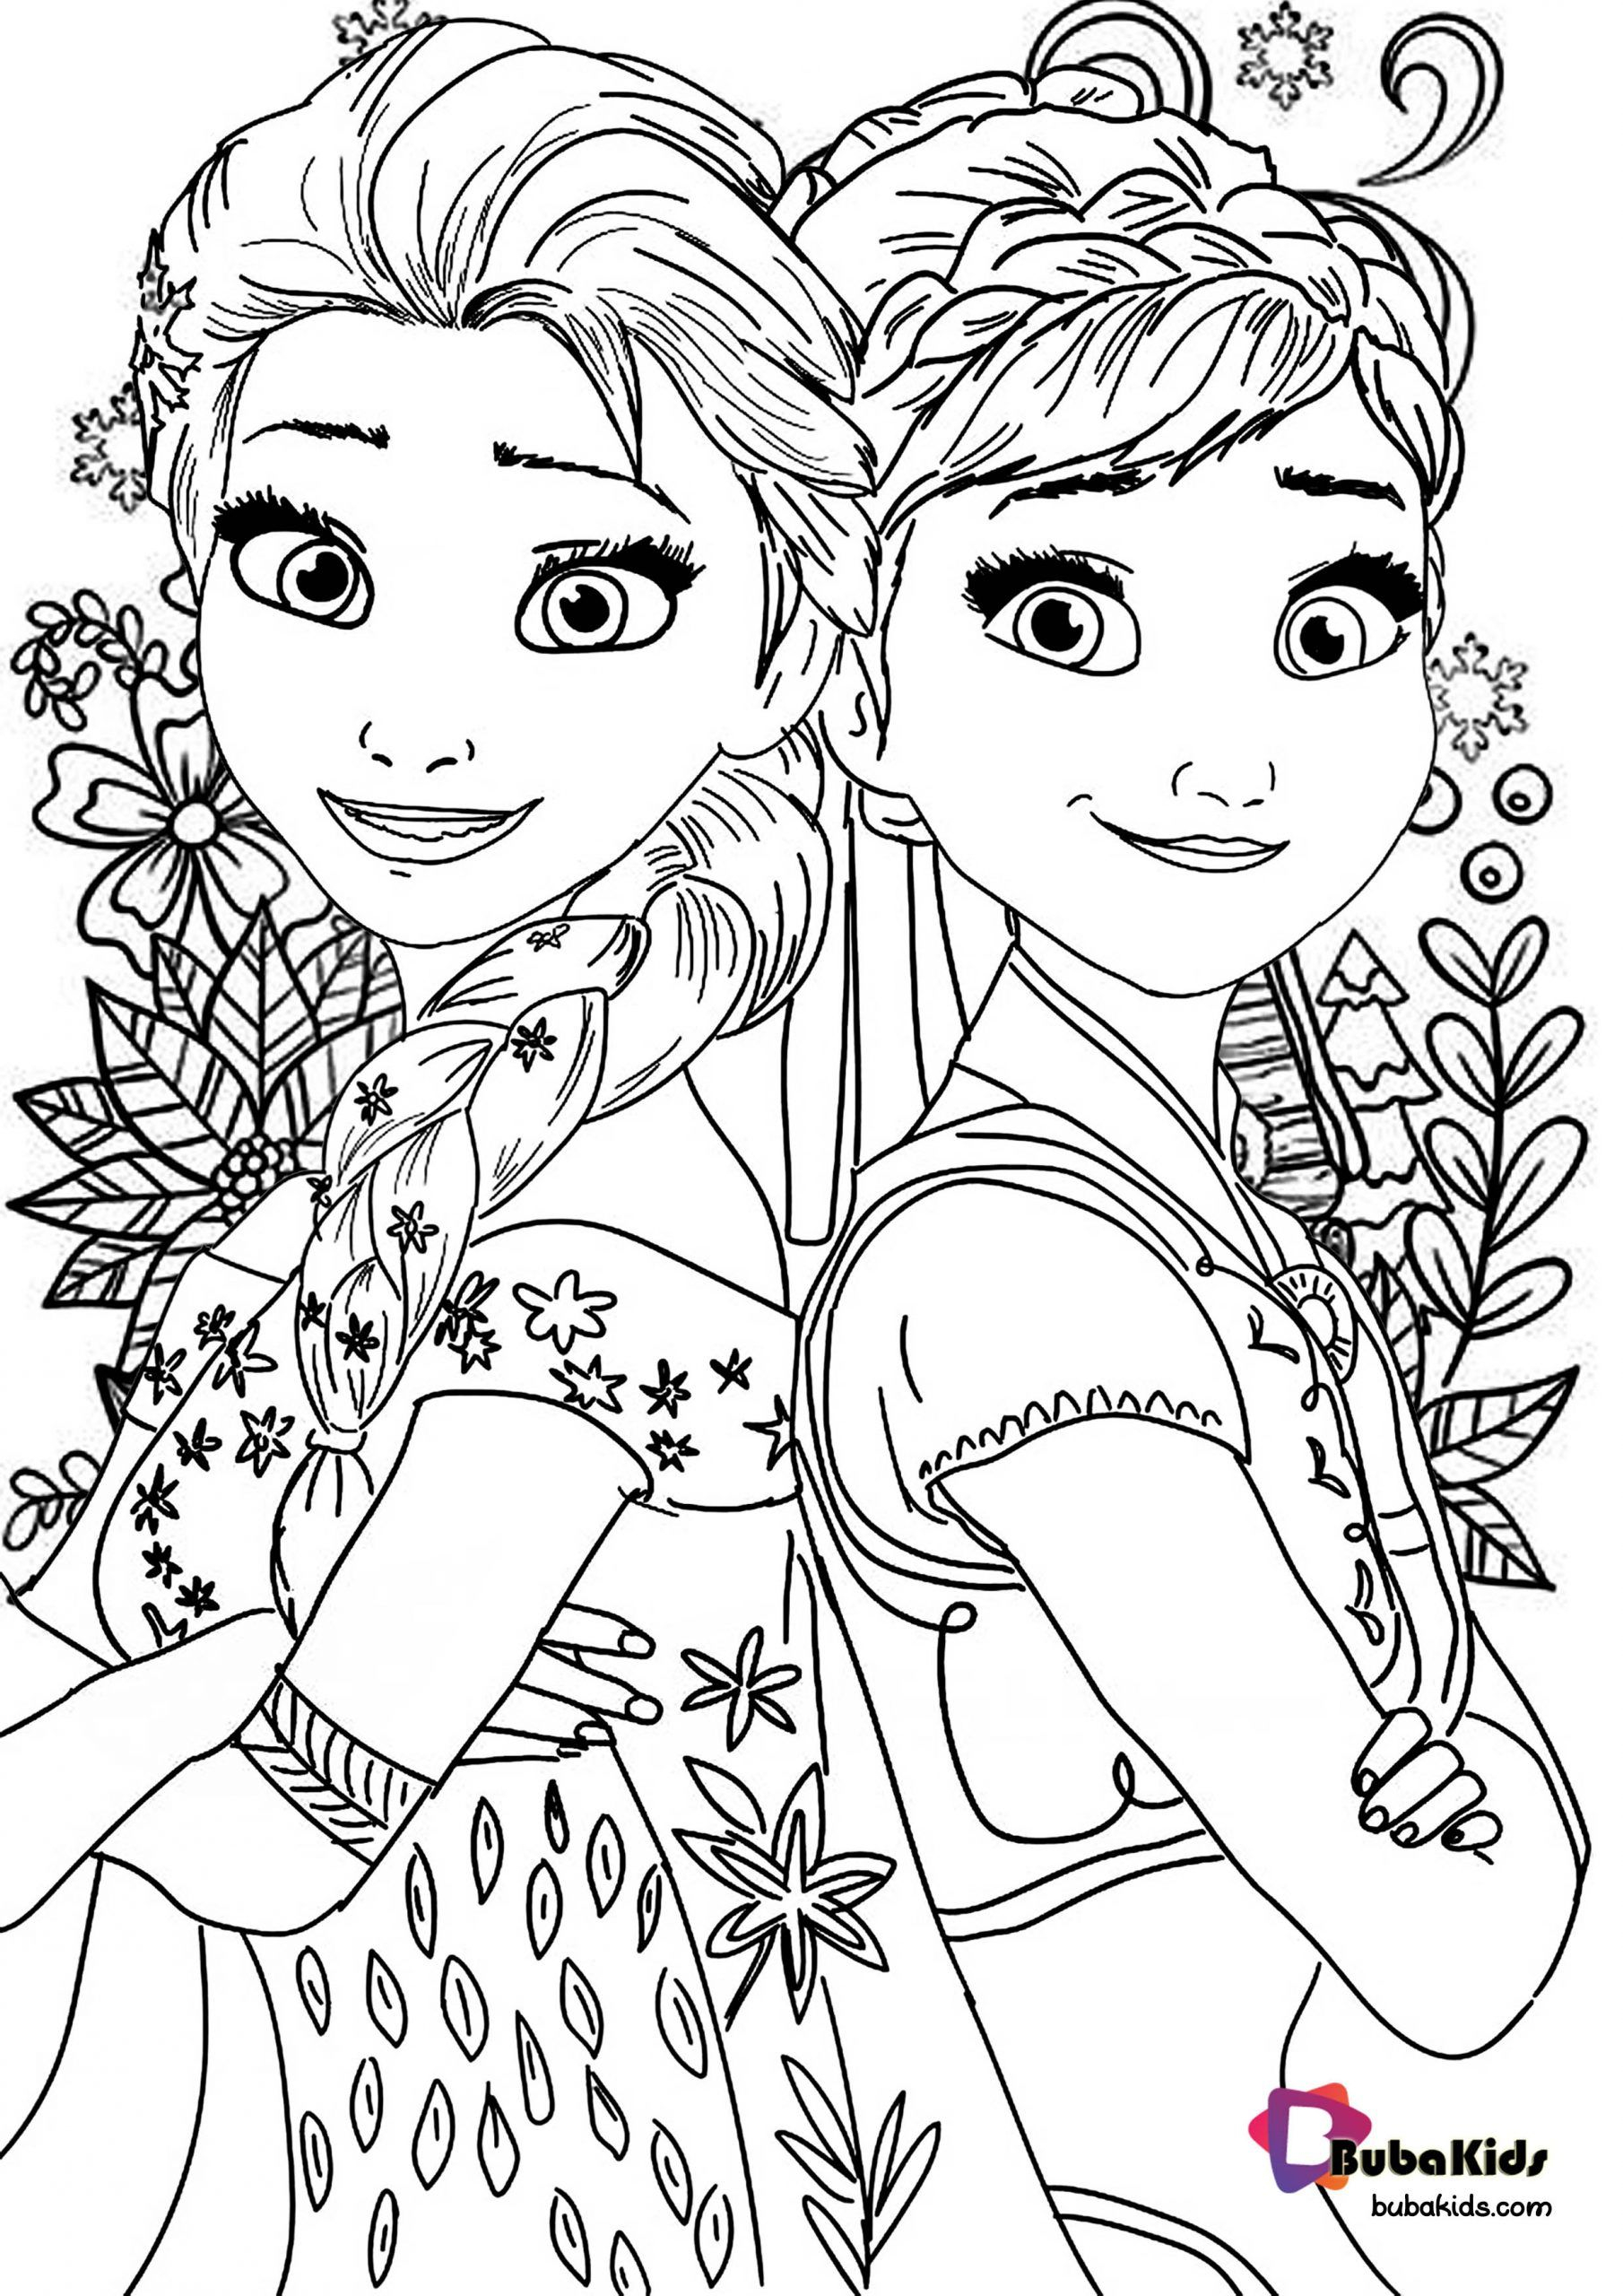 Frozen 2 Coloring Page For Kids Frozen Coloring Pages 